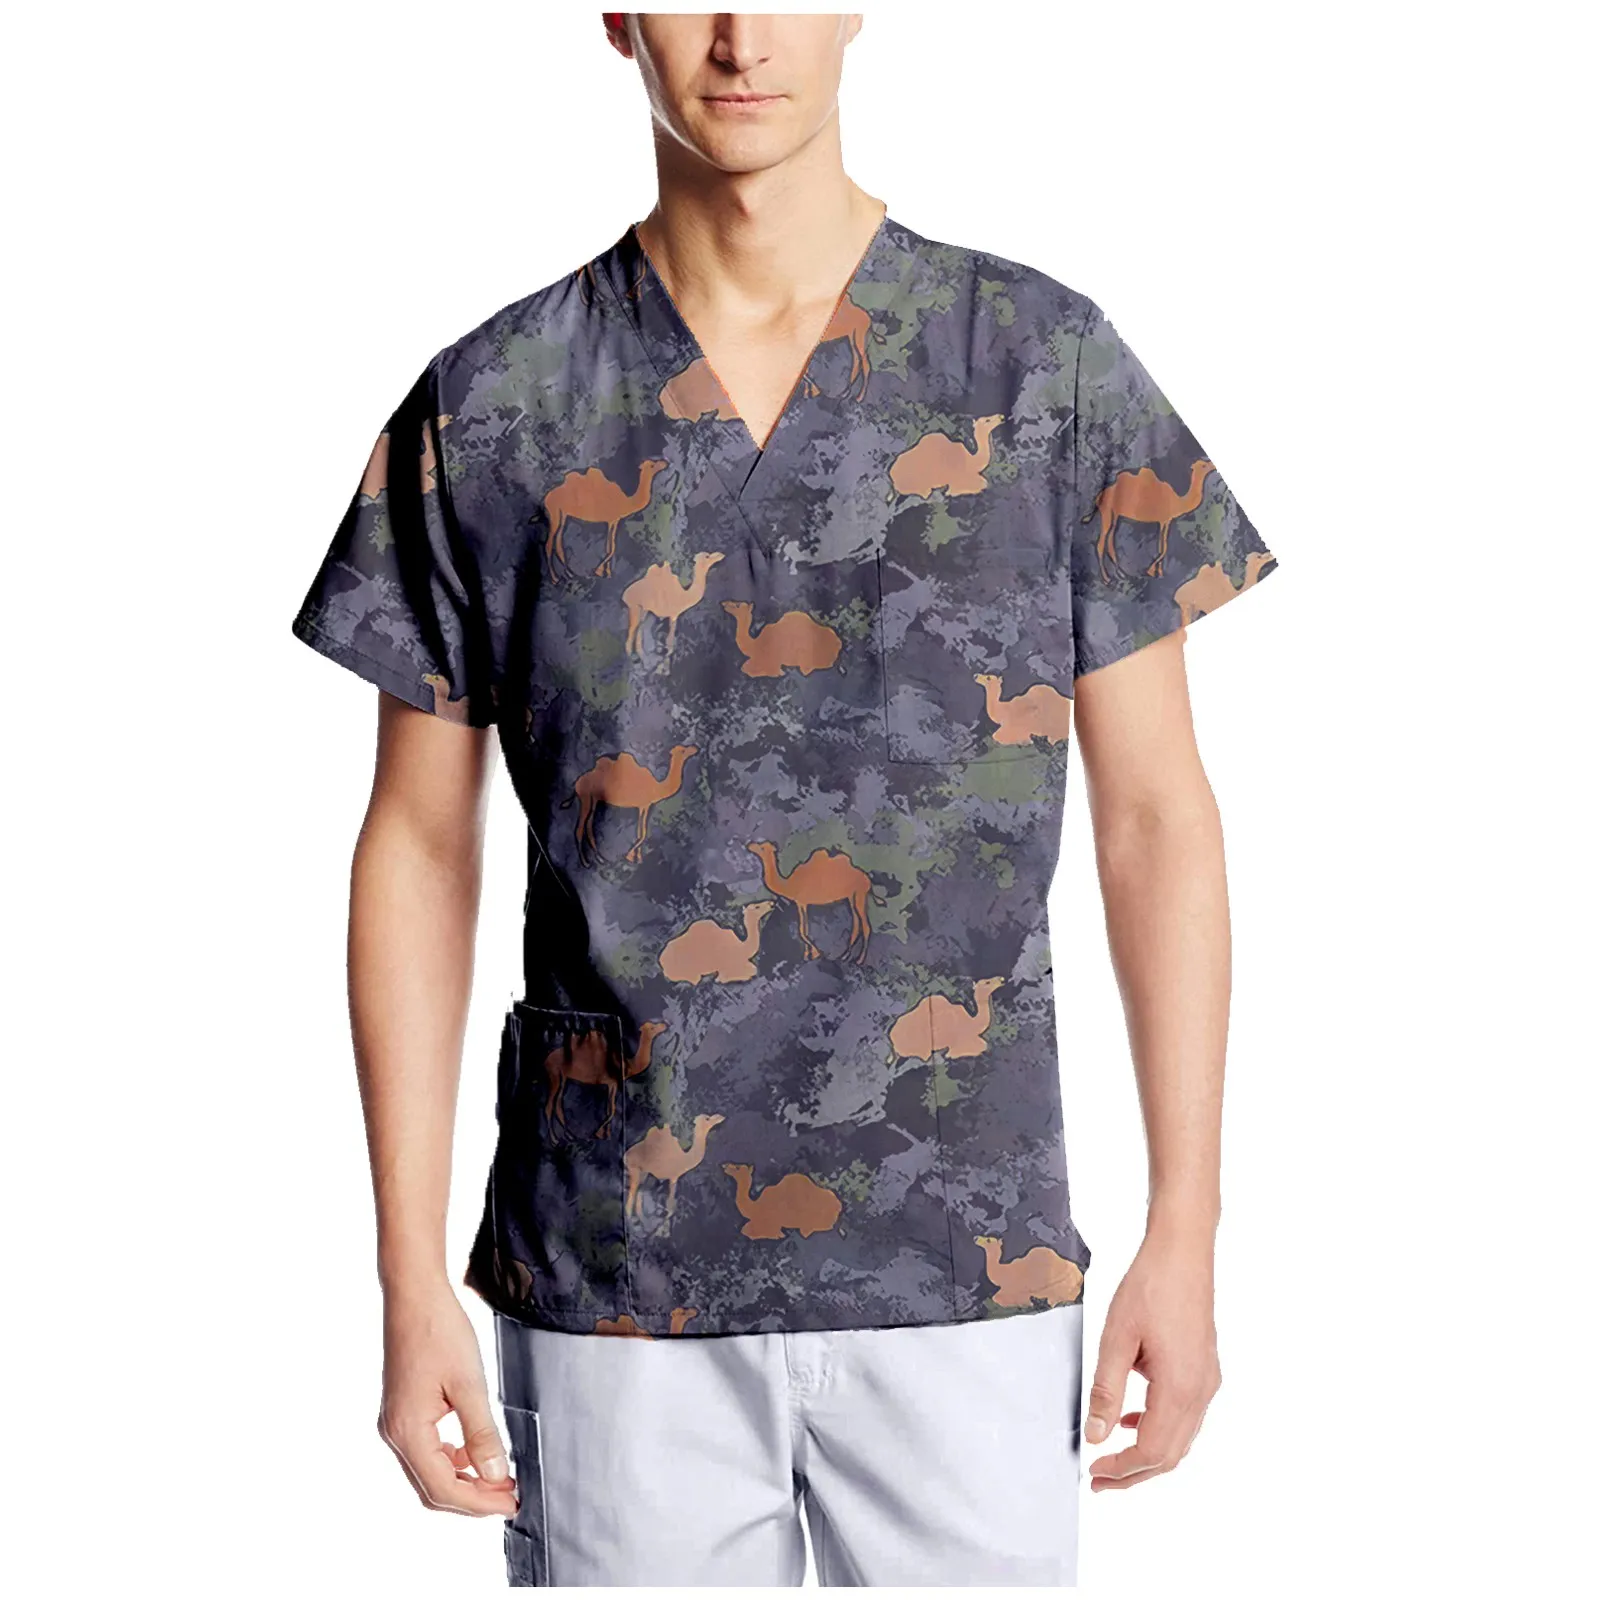 Men Short Sleeve V-neck Tops Nursing Working Uniform T-shirts With Pockets Camouflage print Polyester Nursing Working Uniform carol hagland working with adults with asperger syndrome